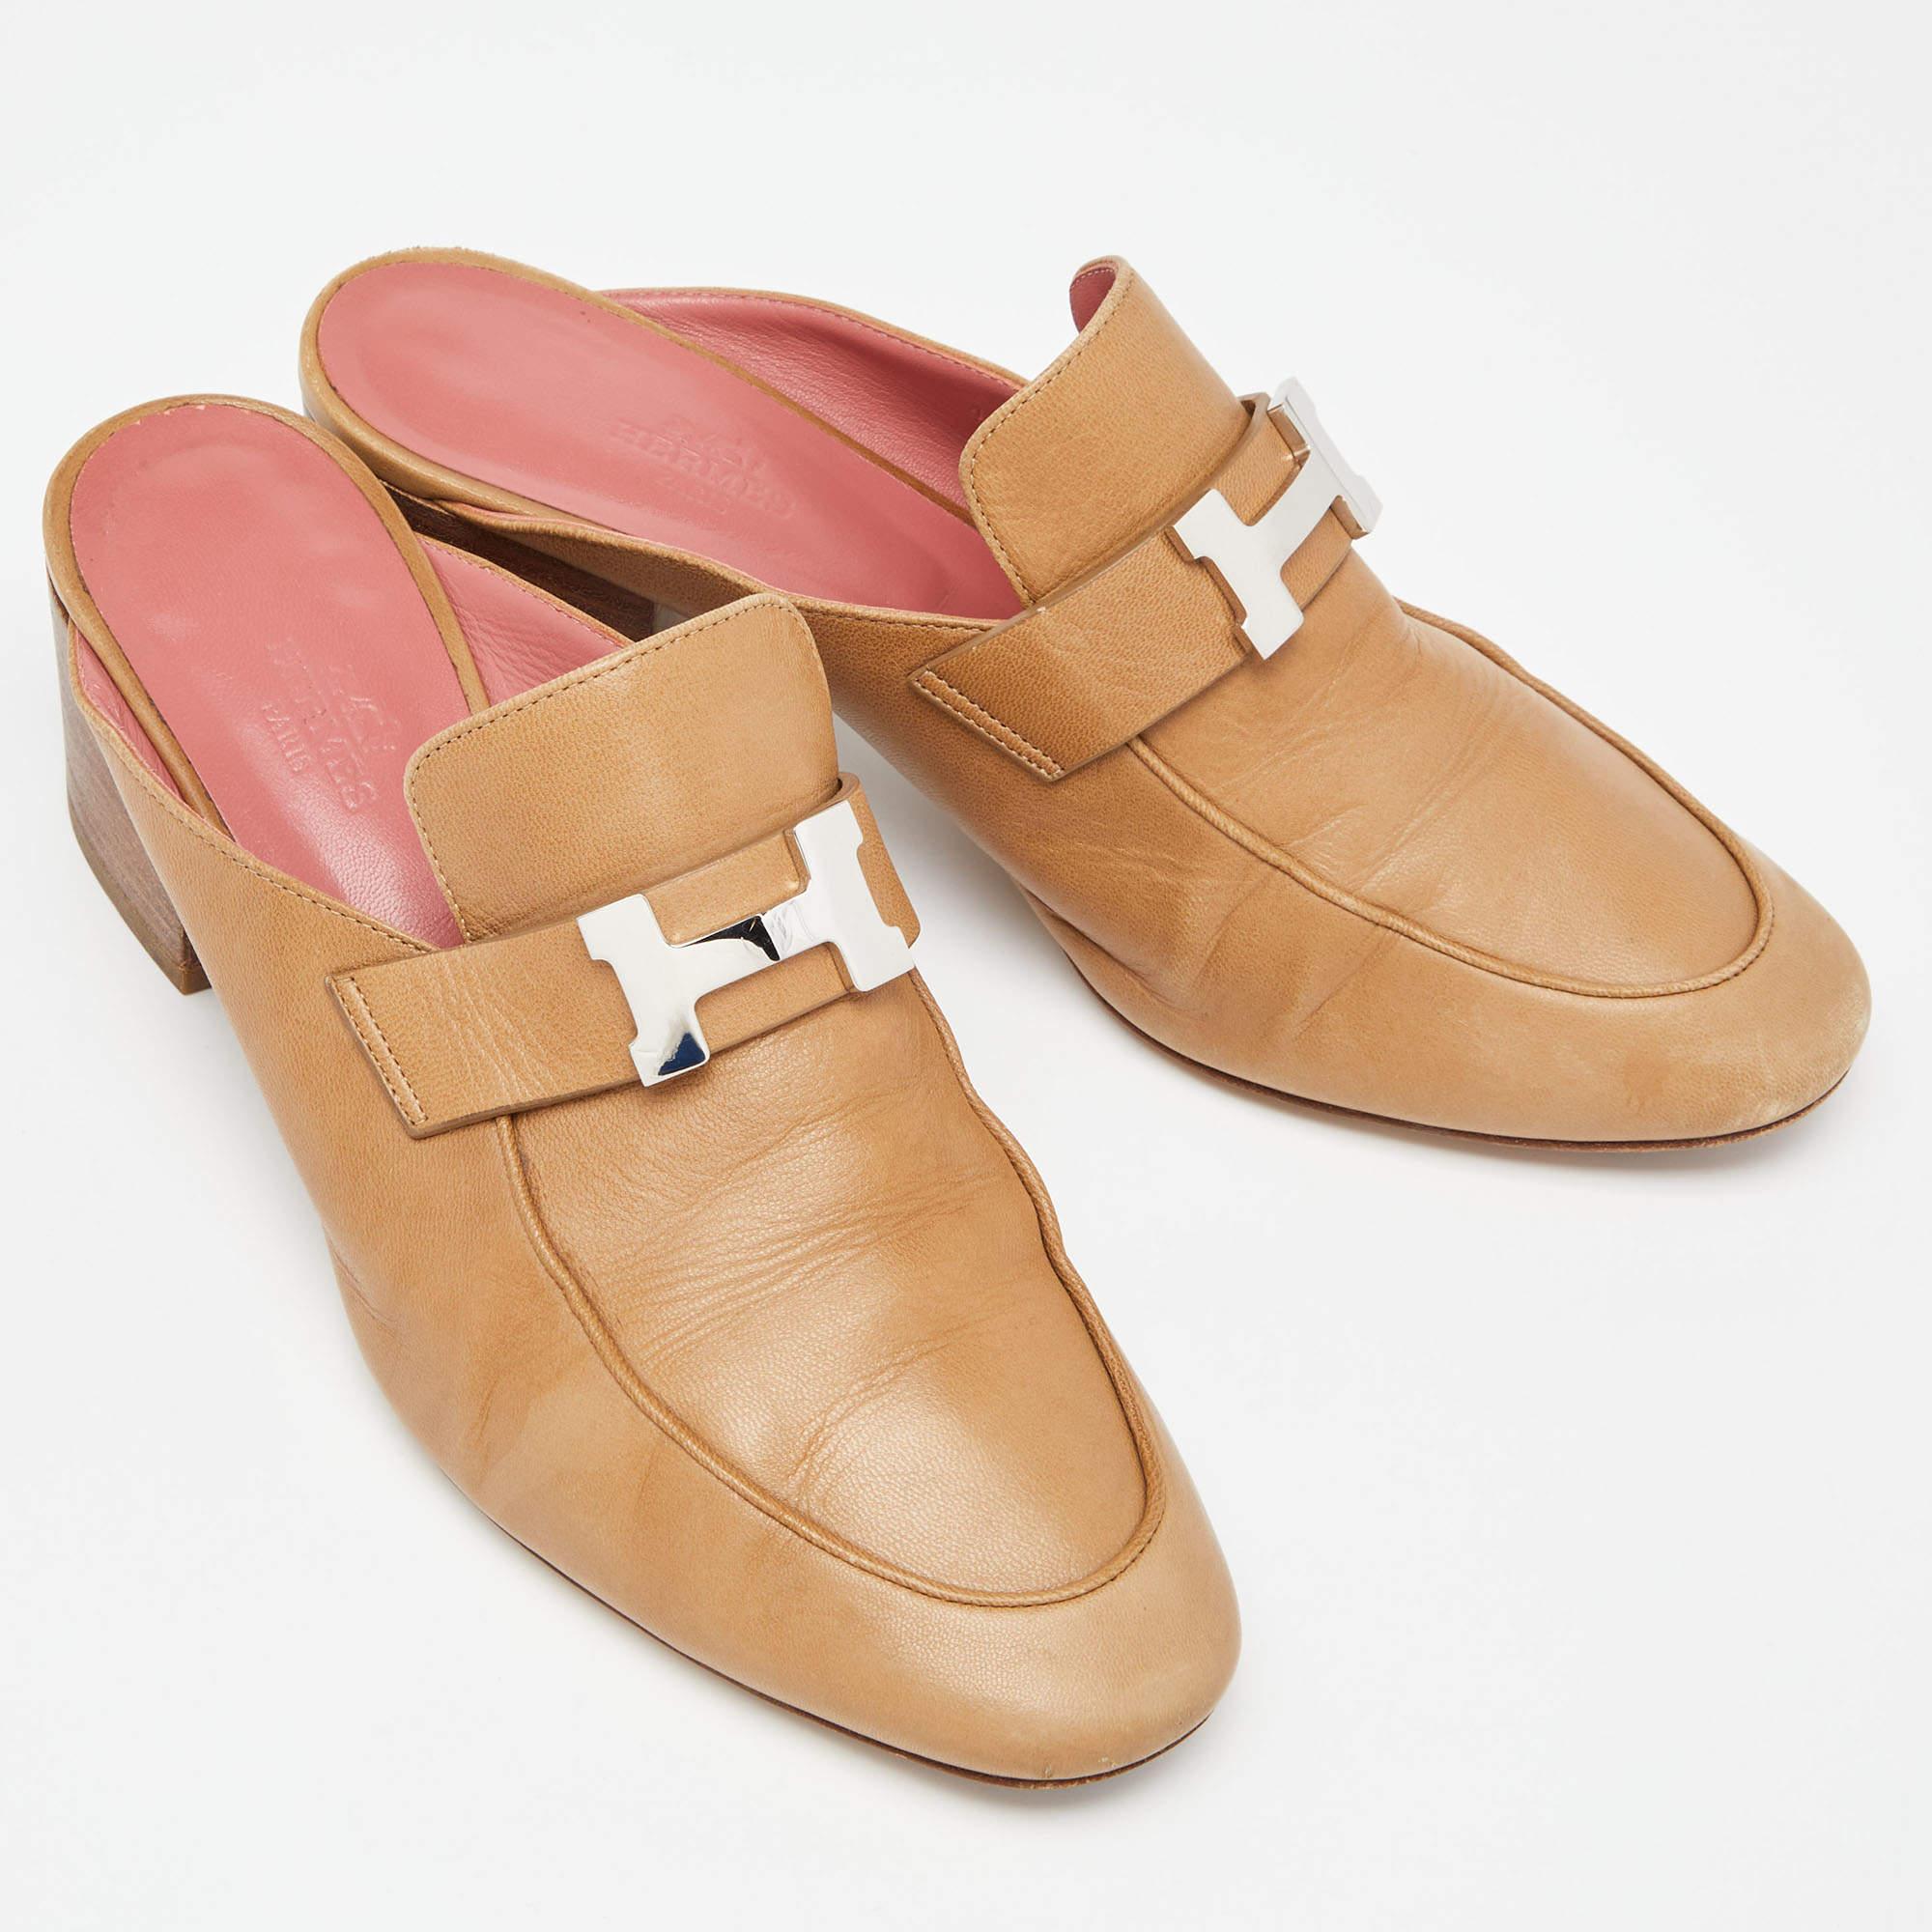 Let this comfortable pair be your first choice when you're out for a long day. These Hermes mules have well-sewn uppers beautifully set on durable soles.

